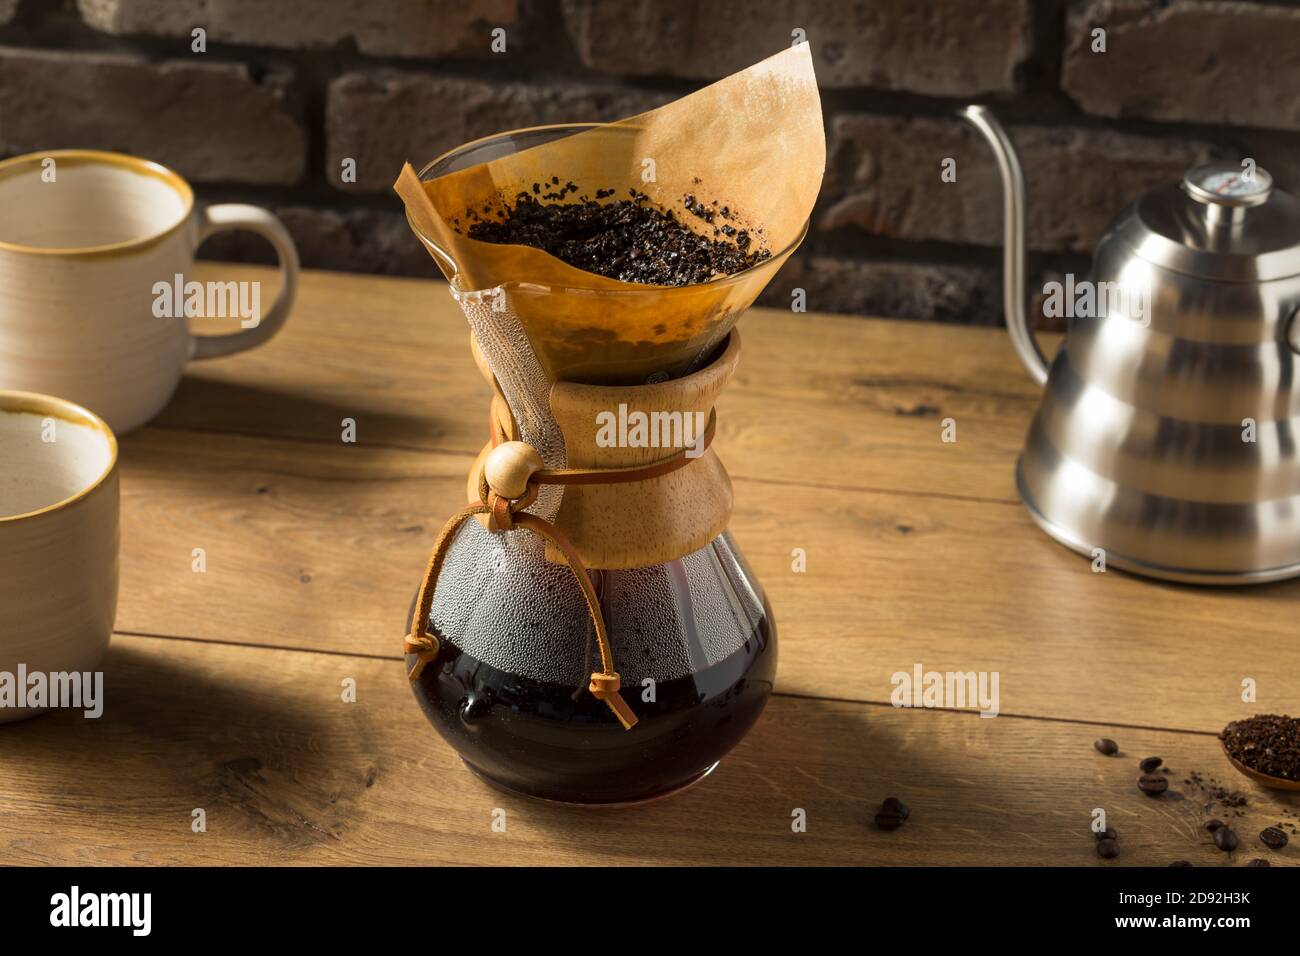 Homemade Pour Over Coffee Ready to Drink Stock Photo